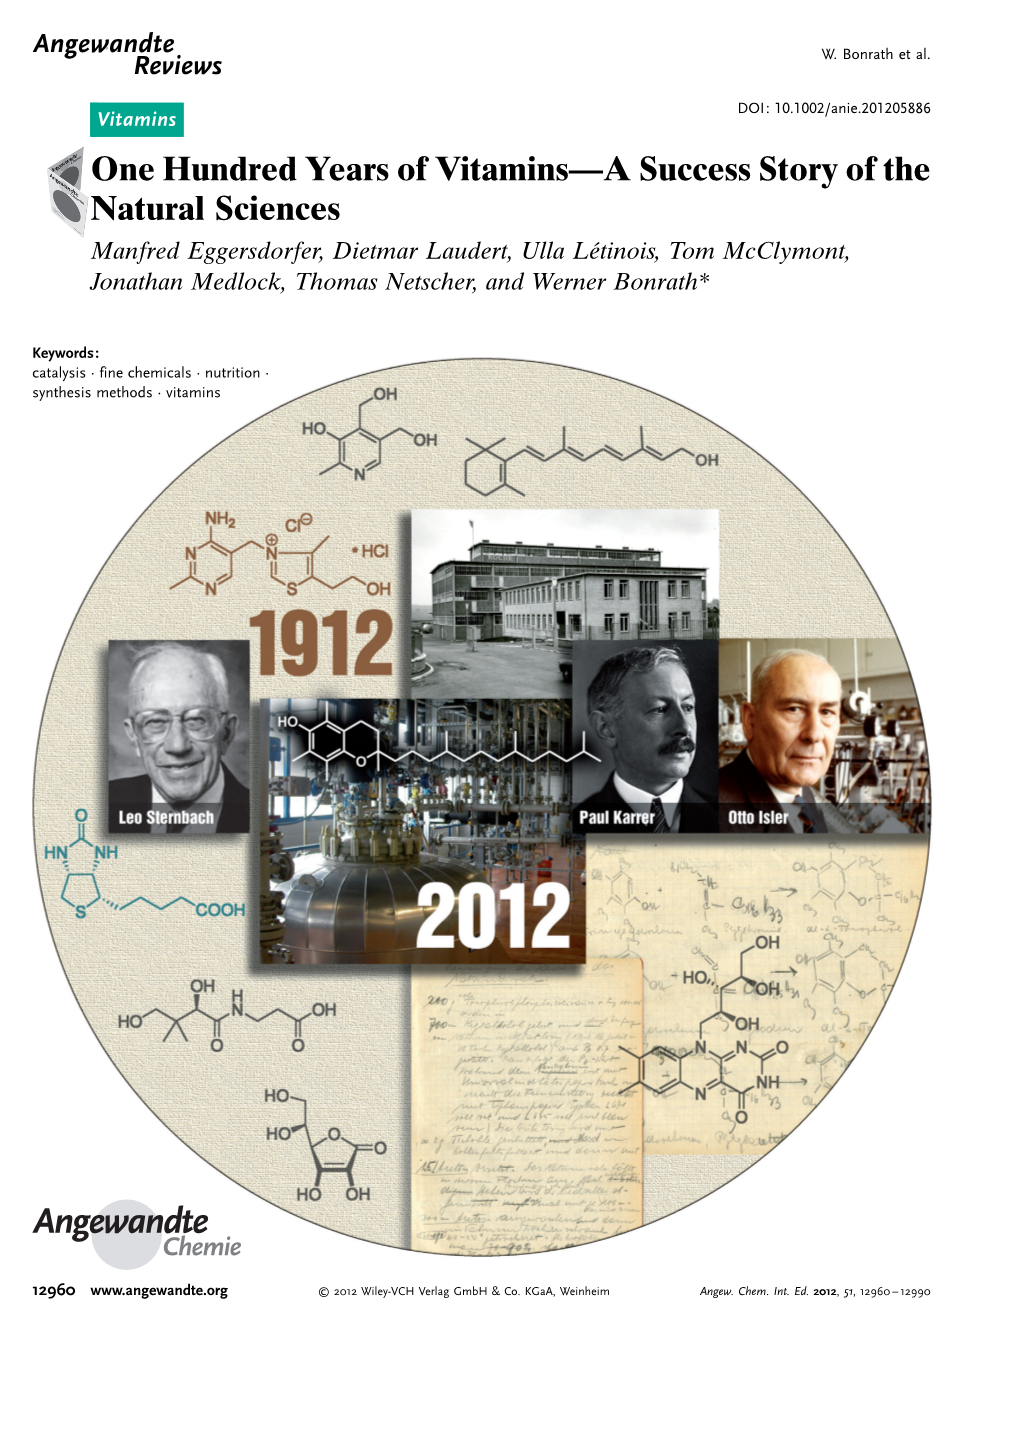 One Hundred Years of Vitaminsa Success Story of the Natural Sciences